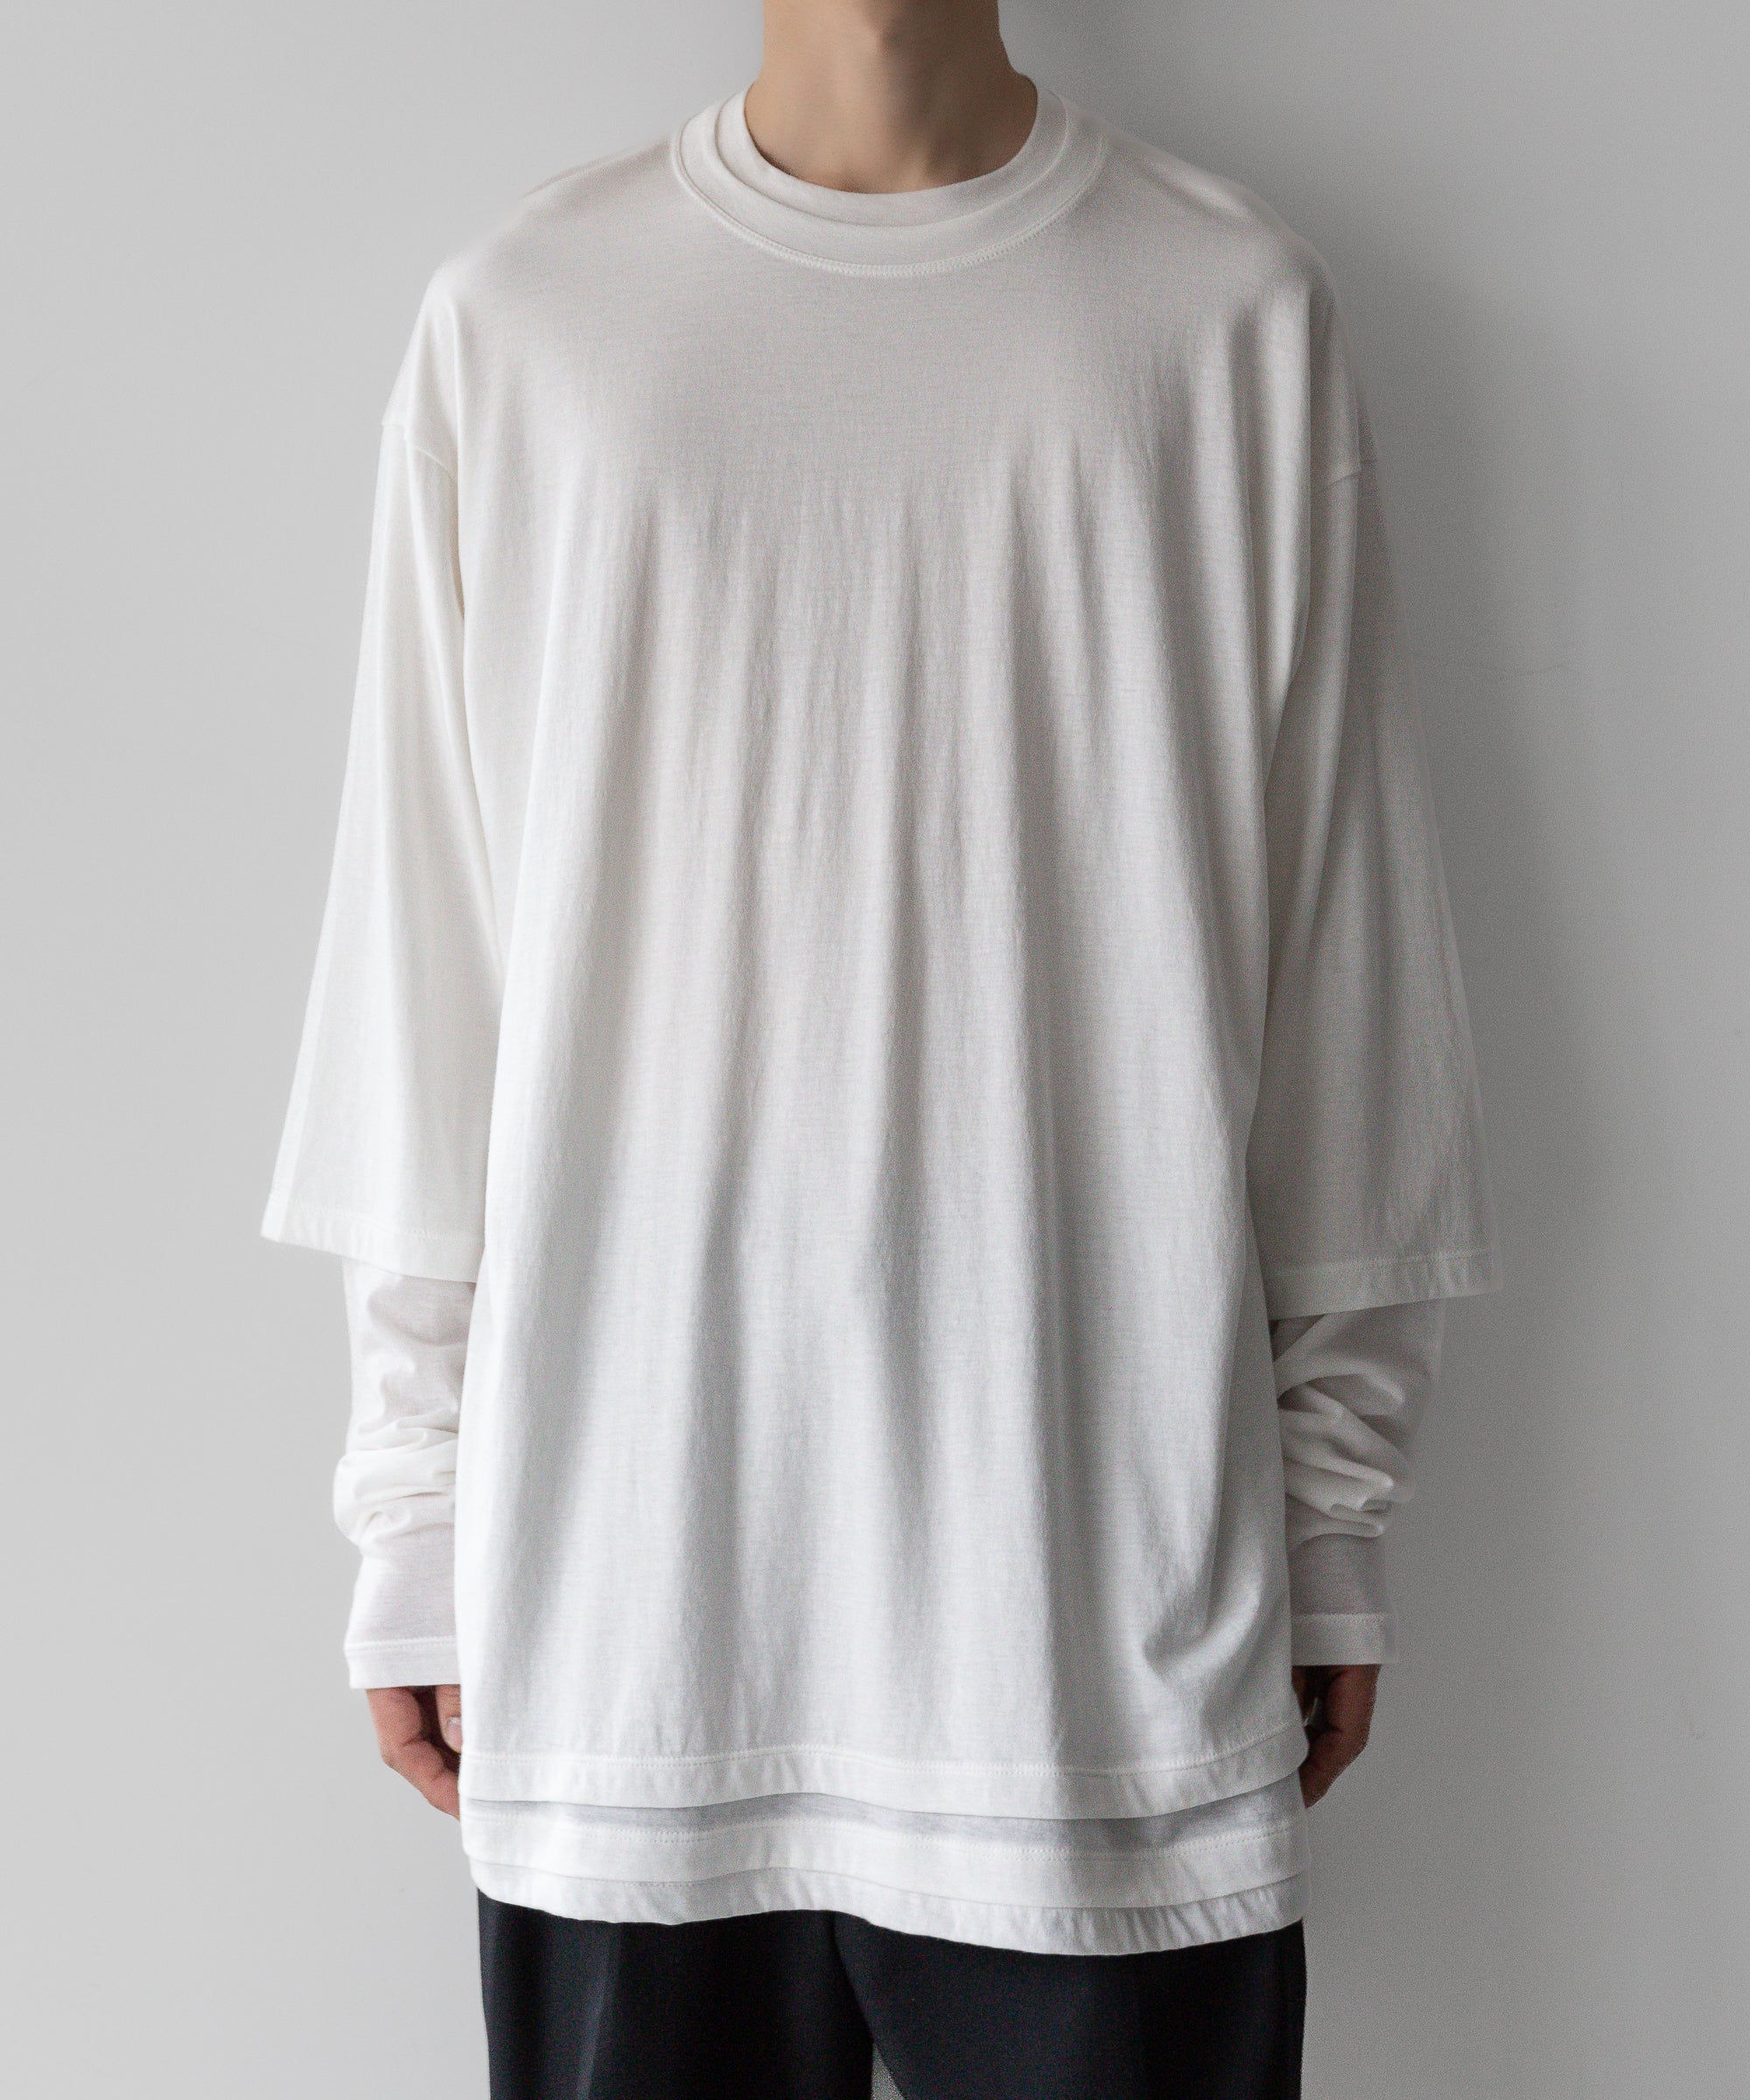 【 The Viridi-anne 】DOUBLE LAYERED LONG SLEEVE TEE - OFF WHITE sessionセッション福岡セレクトショップ 公式通販サイト 